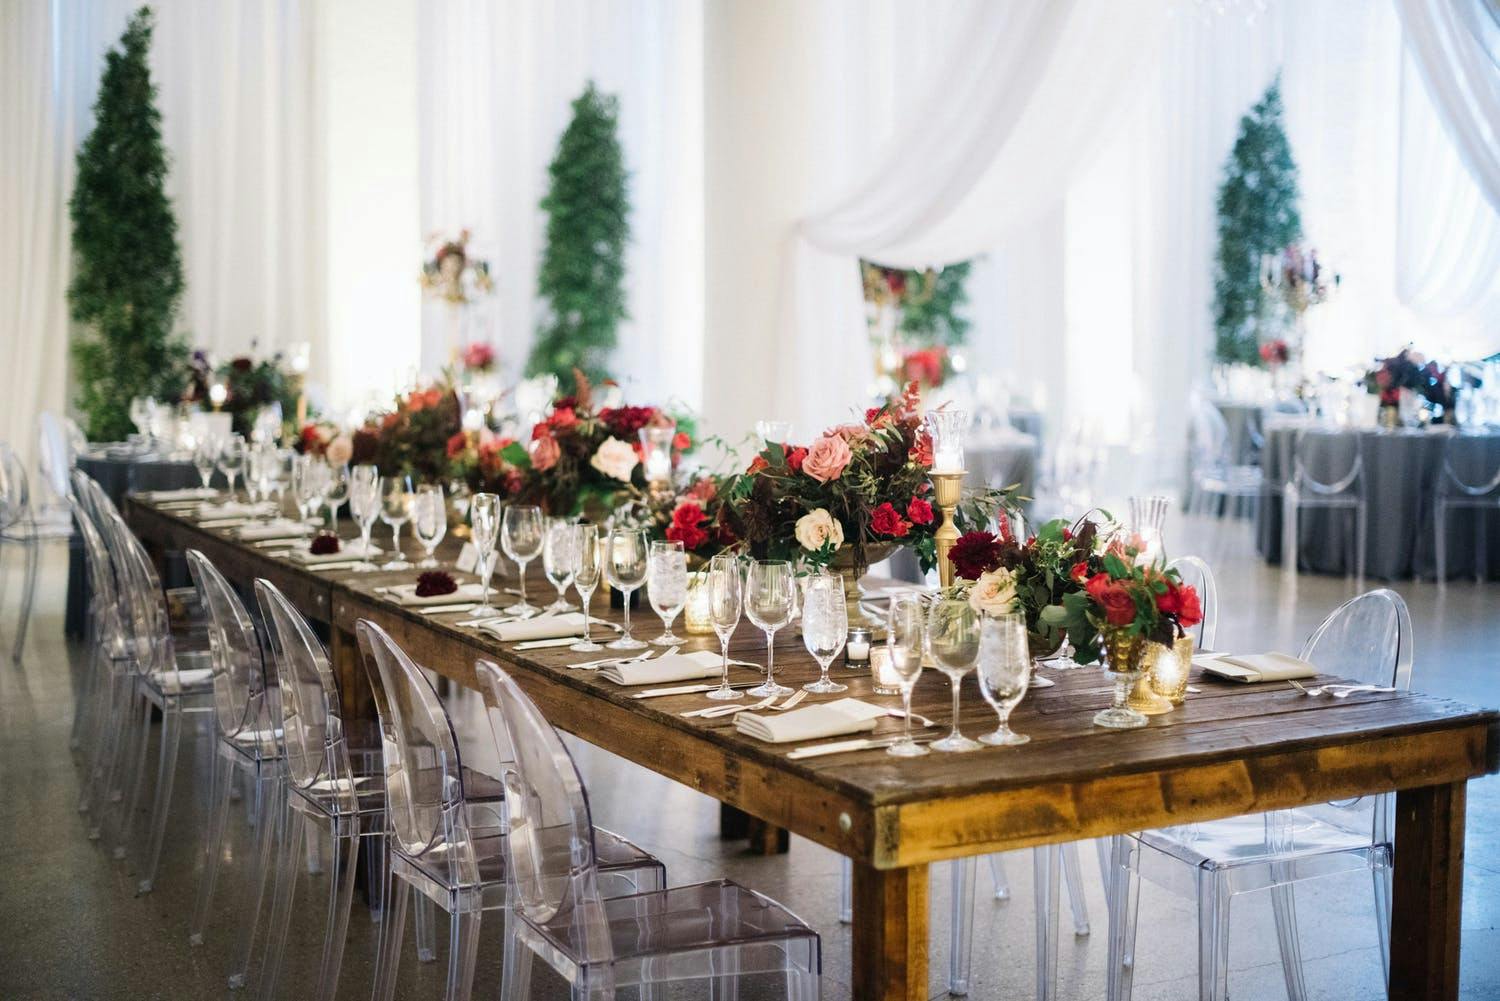 Rustic winter wedding table with pink and red floral centerpieces | PartySlate